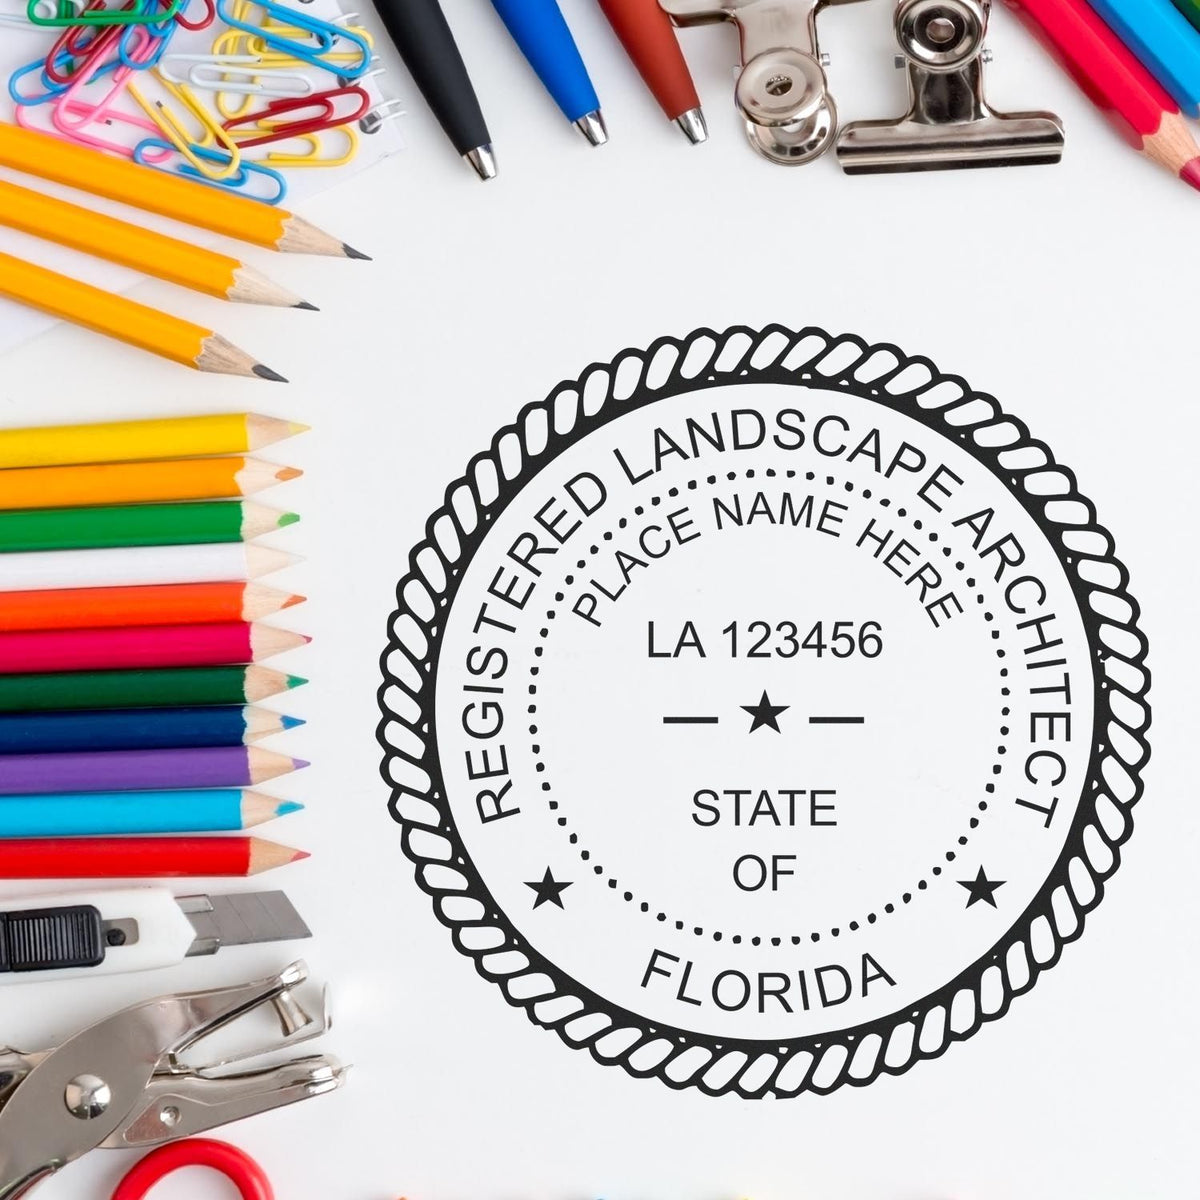 A photograph of the Self-Inking Florida Landscape Architect Stamp stamp impression reveals a vivid, professional image of the on paper.